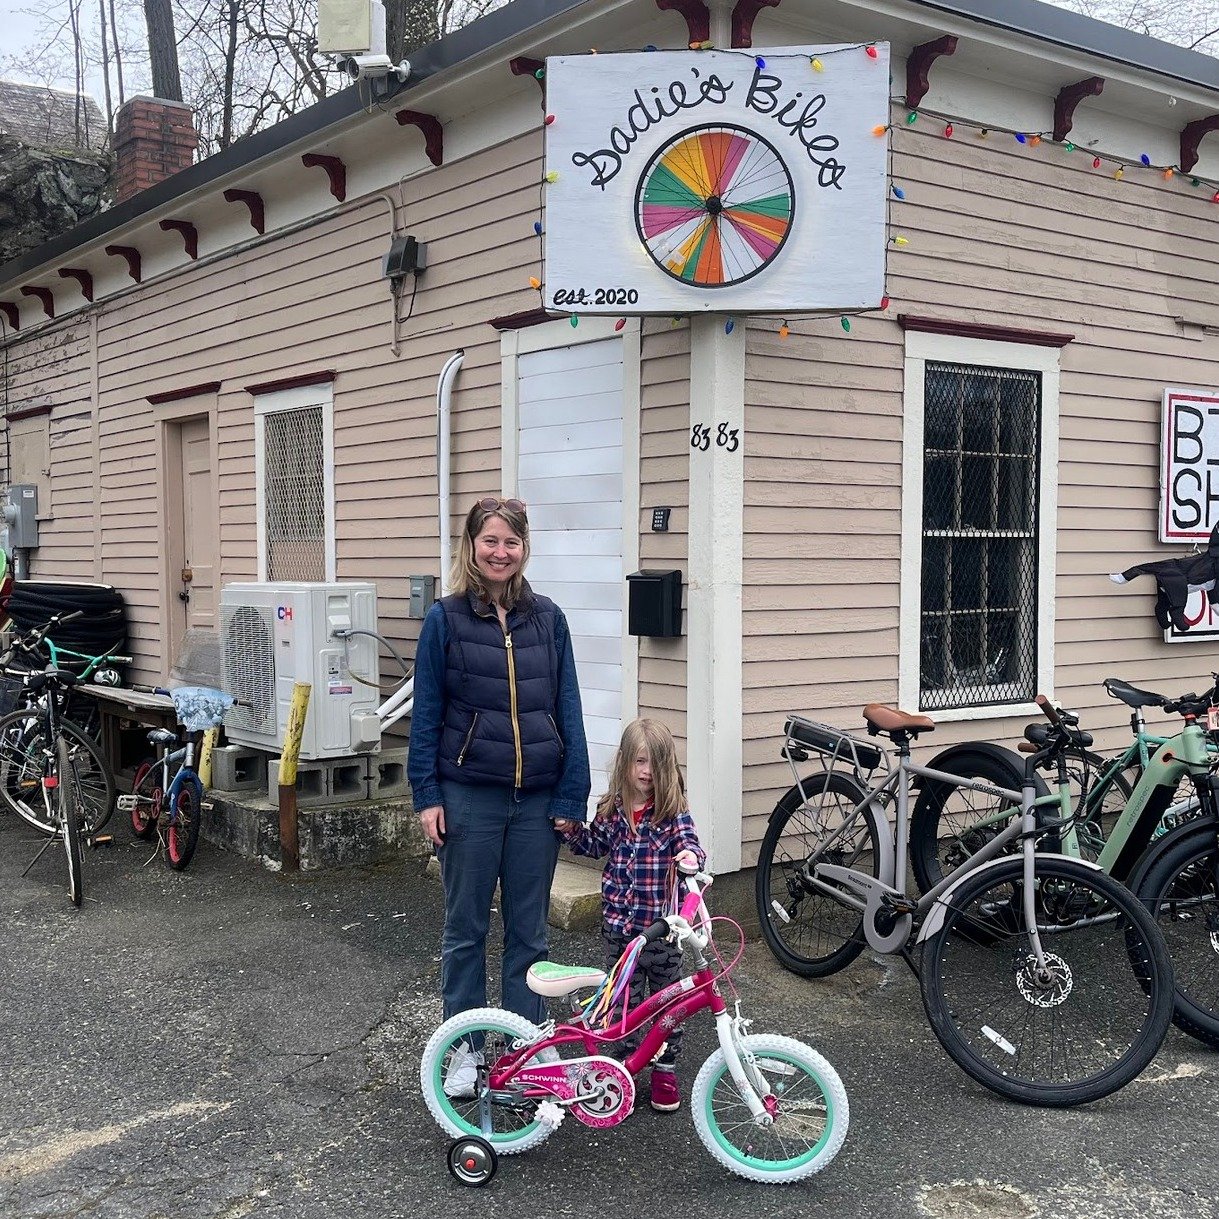 Kid Time Tuesday!

One of the coolest bikes has left the shop and it even got accessorized to be MORE cool!!!!!!!!!!!!

Want to know what else is cool?
All youth bikes sold by Sadie's bikes are eligible for a trade-in value for the next size bike. Th